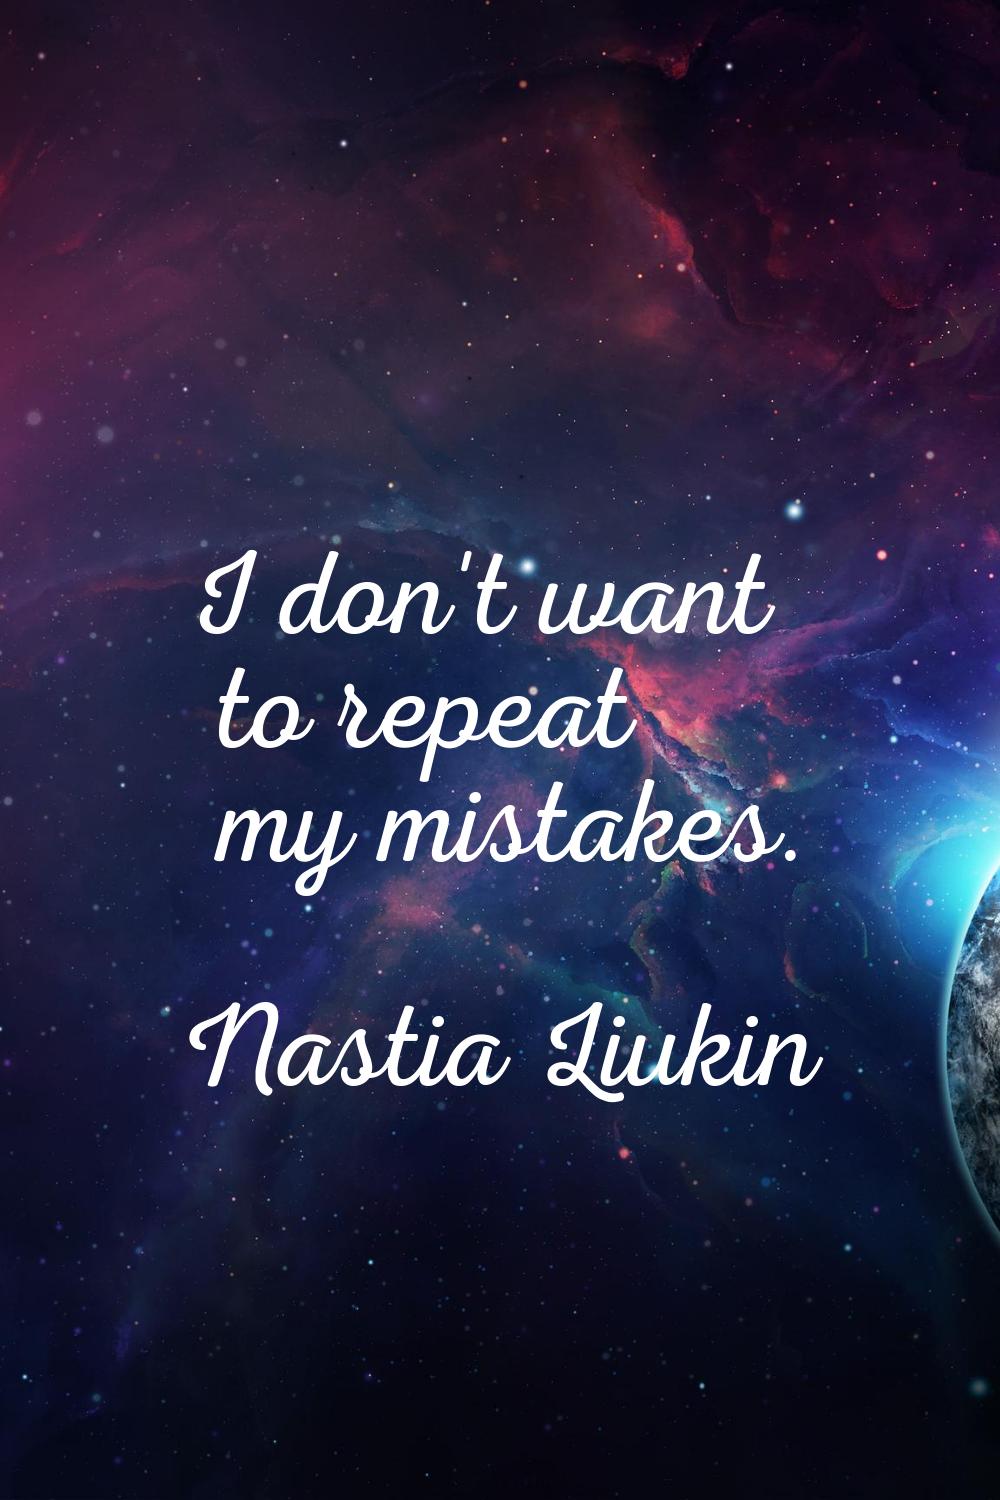 I don't want to repeat my mistakes.